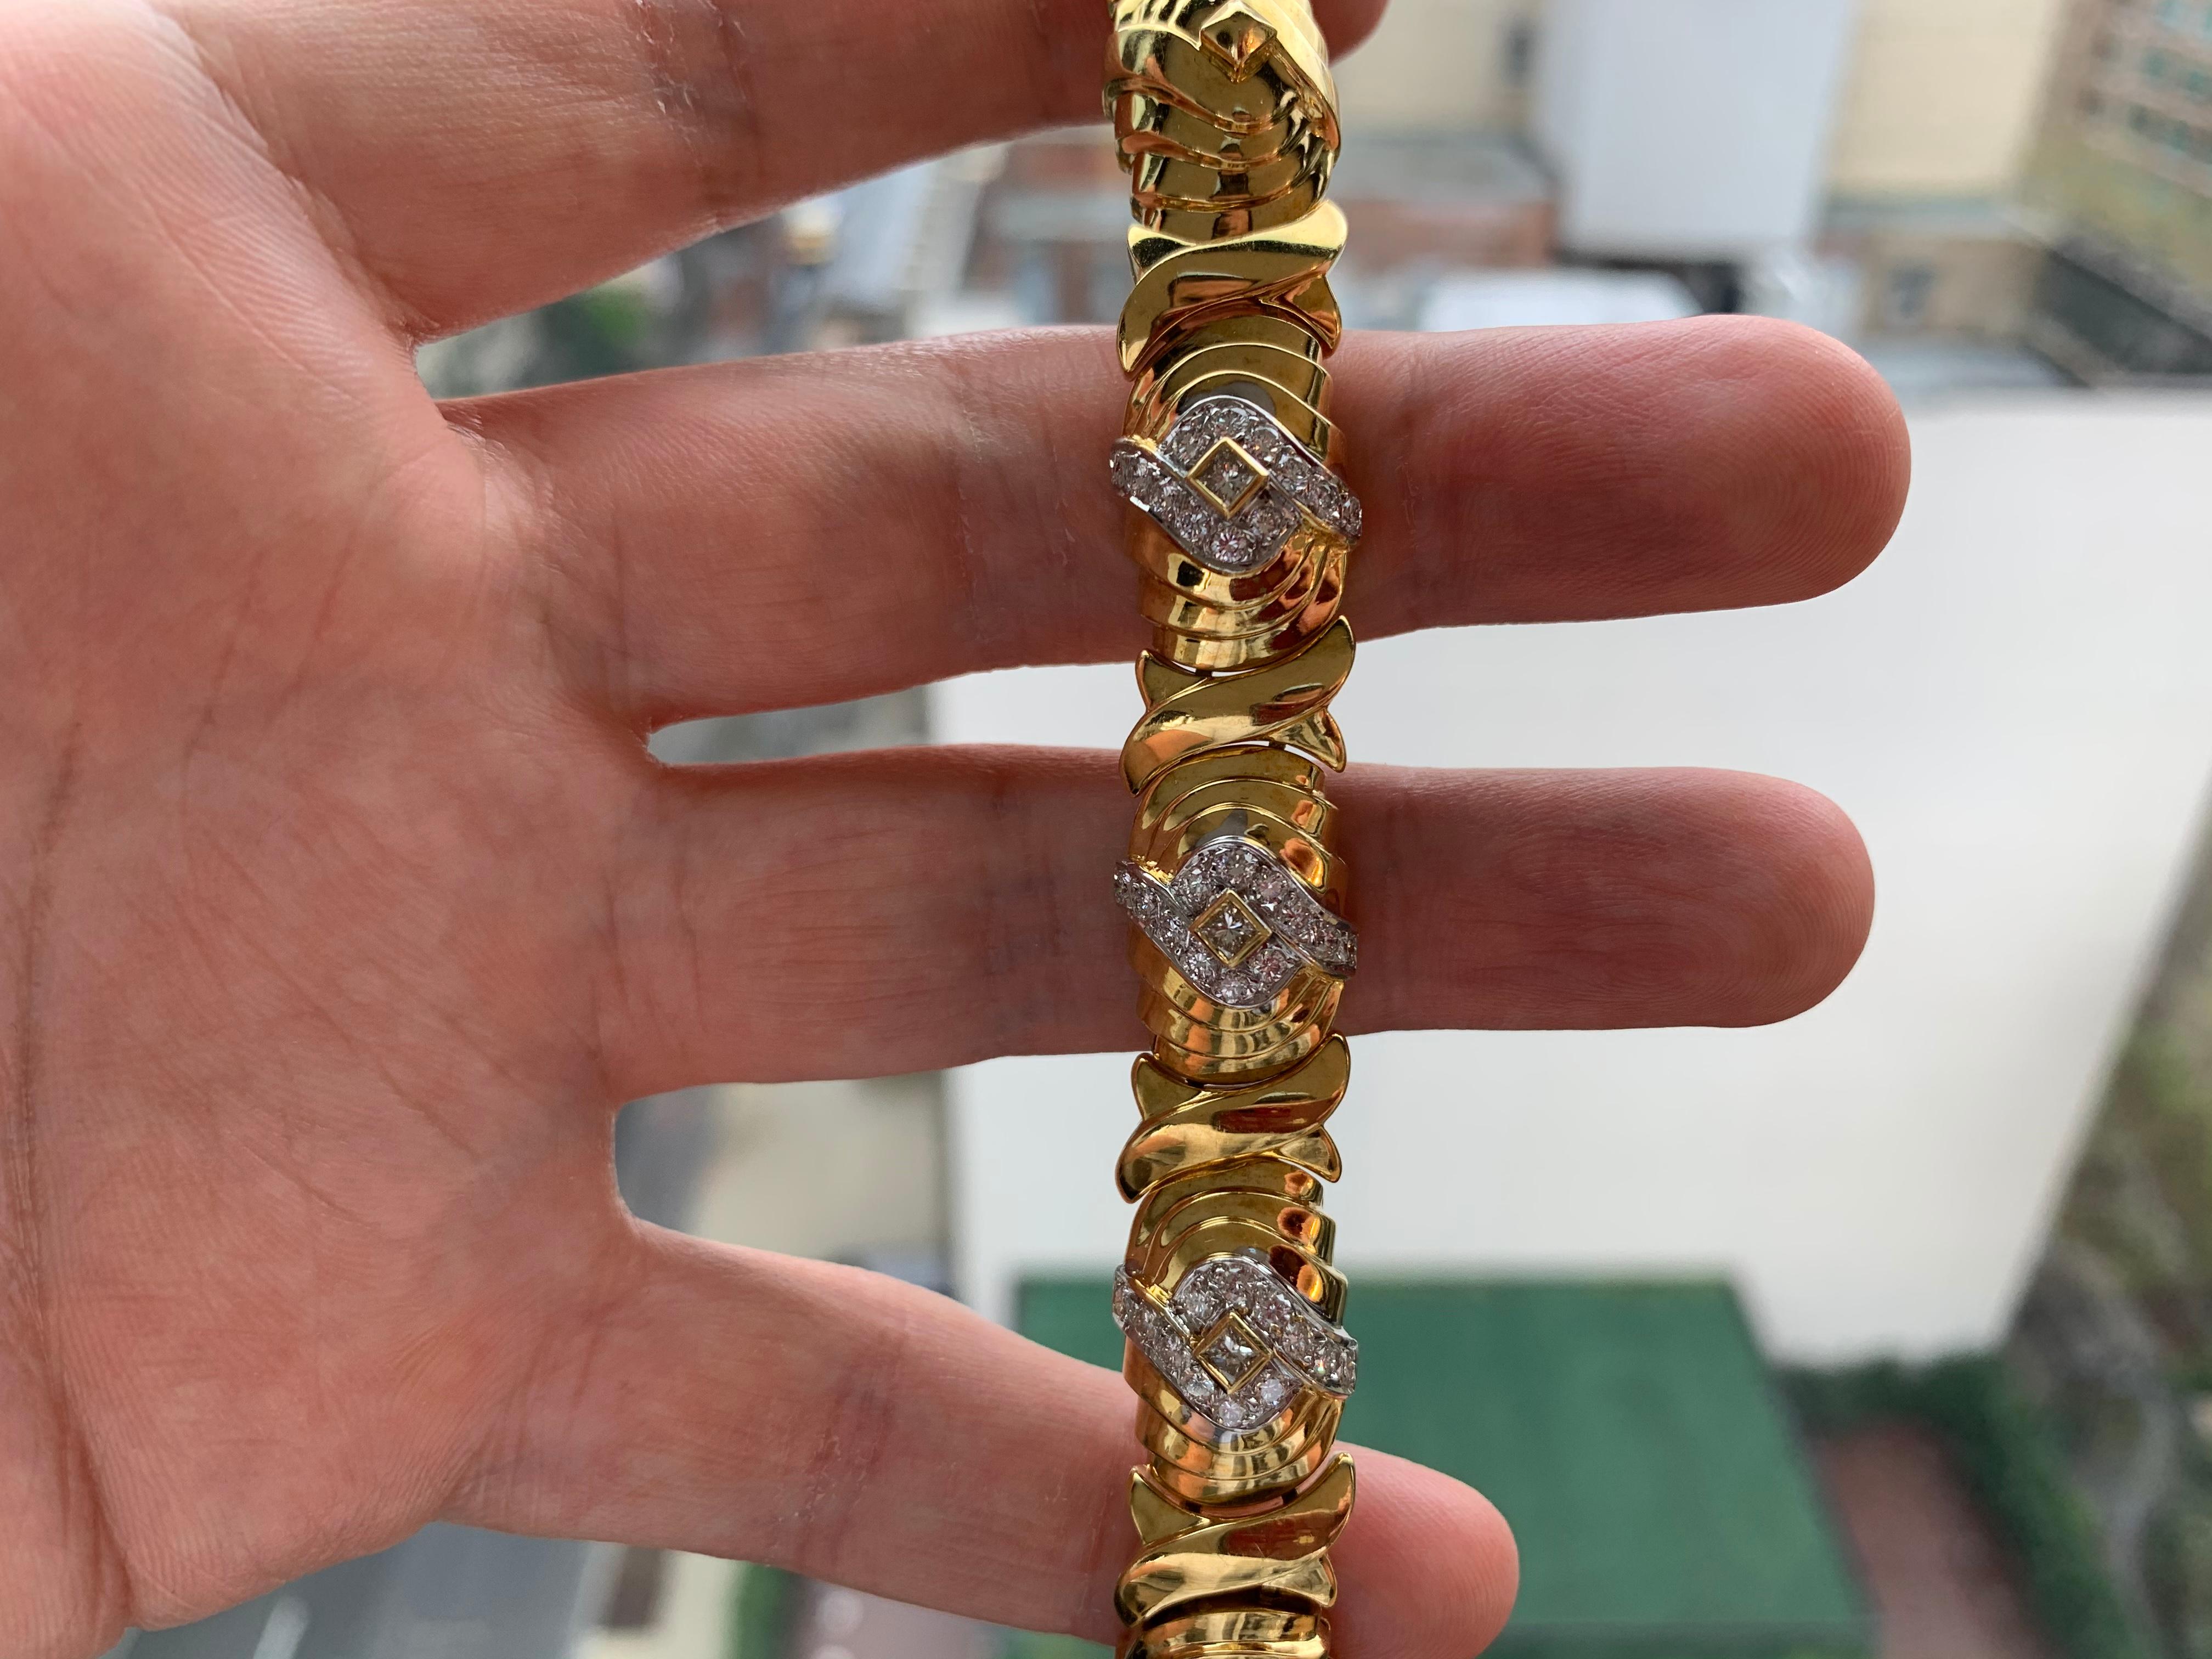 Men's Diamond and Gold Bracelet by elan

18 karat gold bracelet with square diamonds 
Size: 7 ½ inches
Weight:  83.1 grams

Made circa 1980